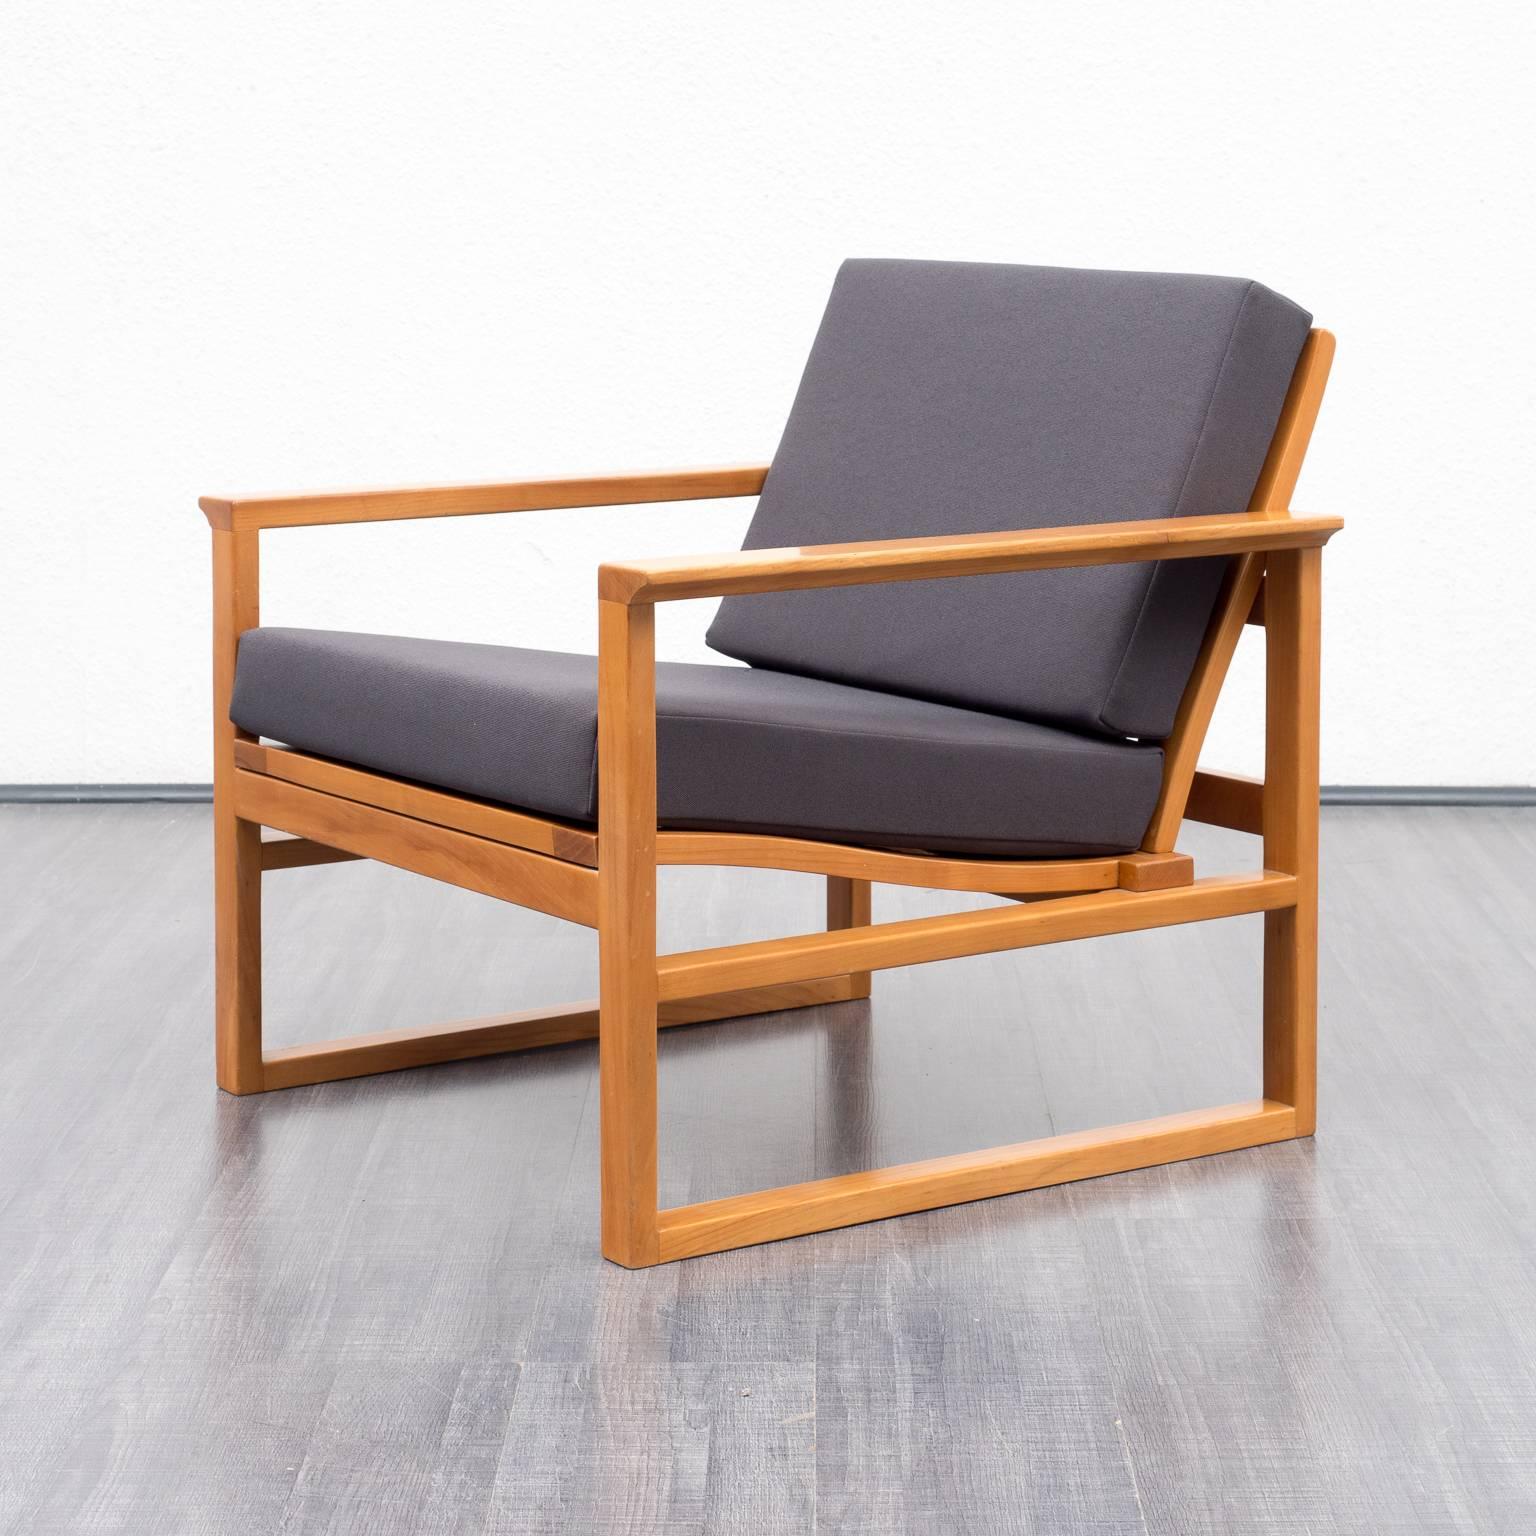 High-quality armchair with footrest from the 1950s, Danish design in the style of Børge Mogensen. Solid cherrywood frame with mortise and tenon. Armchair and footrest have been professionally reupholstered and covered with a high-quality,